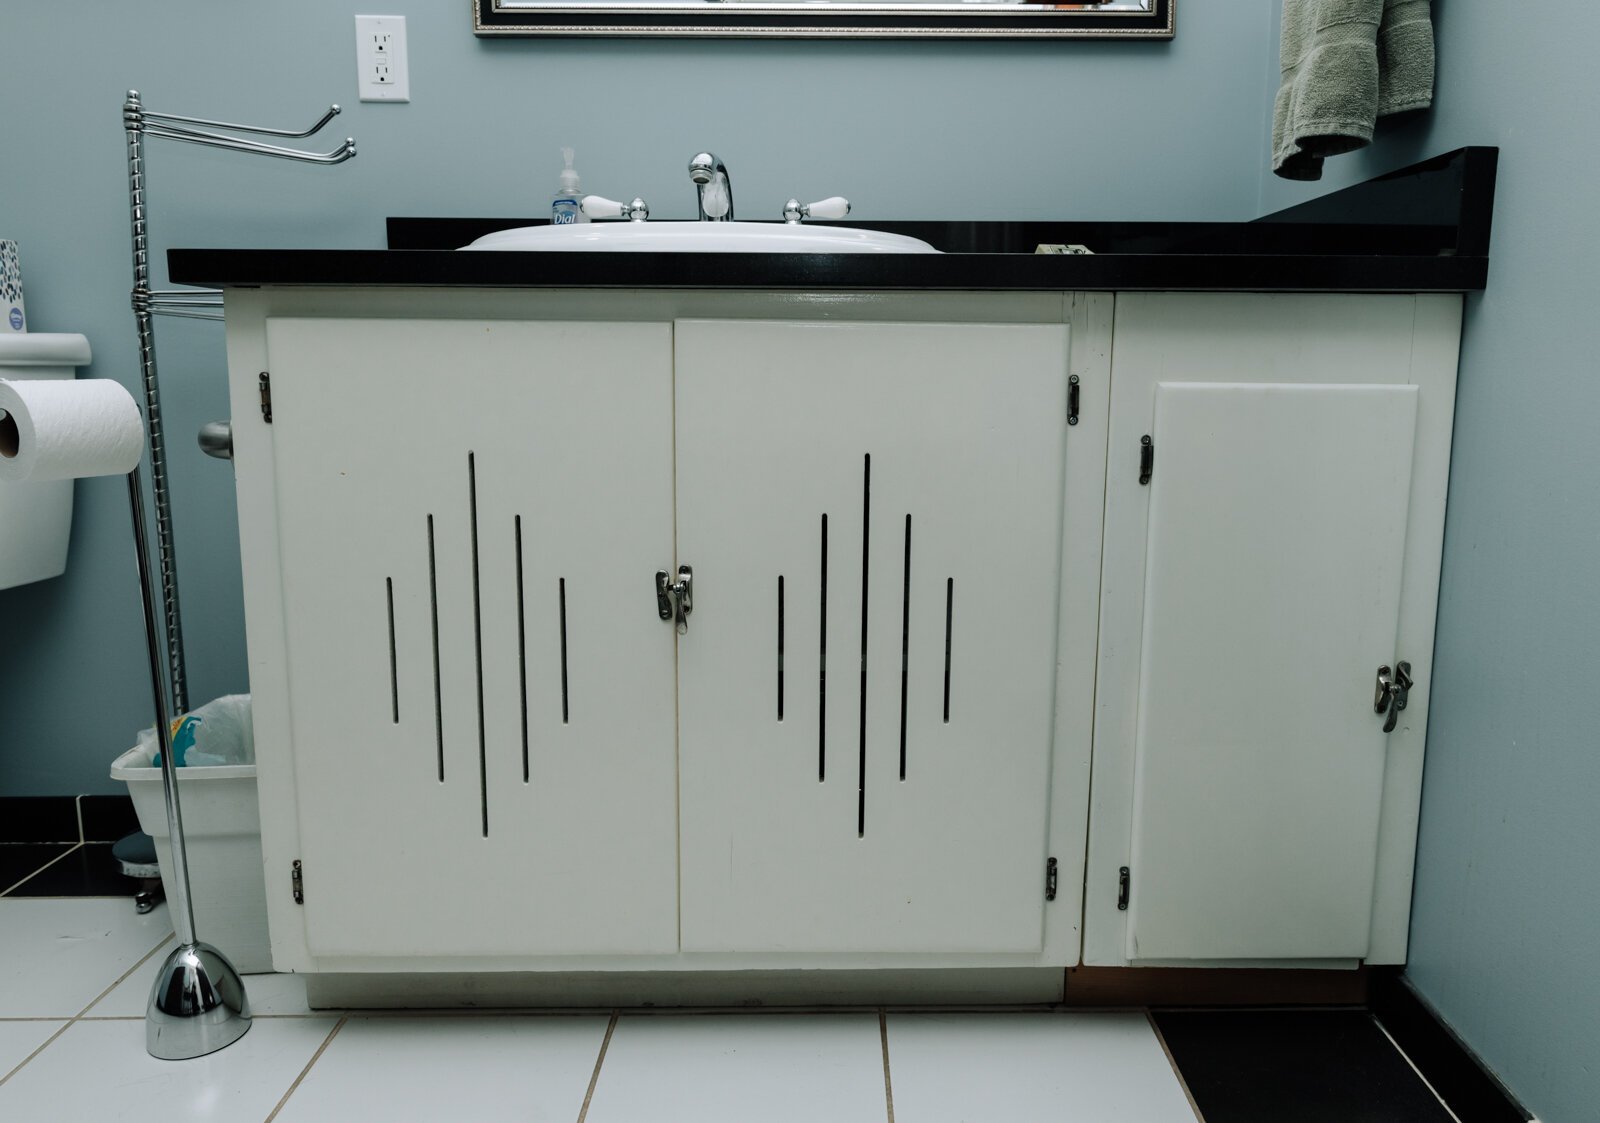 The bathroom in Amy Beatty's accessory dwelling unit features cabinets that were from the original kitchen from 1928. The unit was added on in 2012 to accommodate her mother.